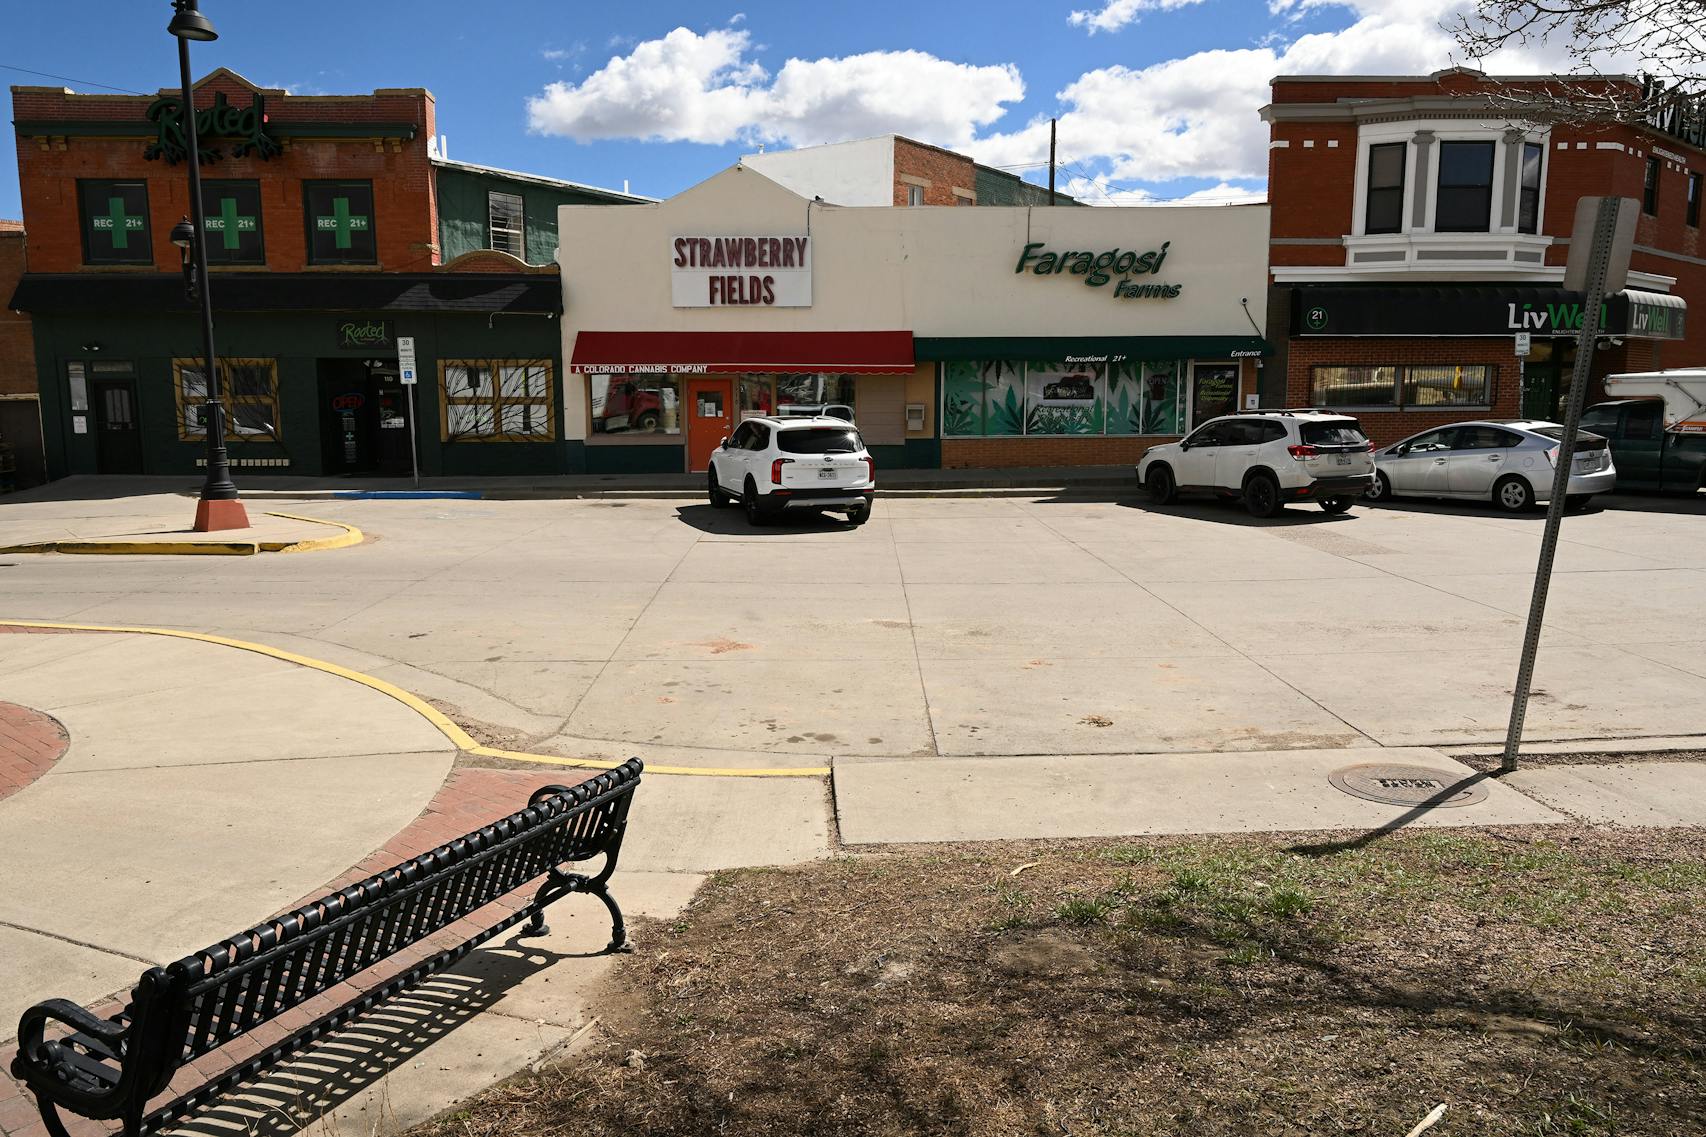 Several marijuana shops are grouped together in Trinidad, Colo. The town near the Colorado and New Mexico state line has around 20 marijuana dispensaries.